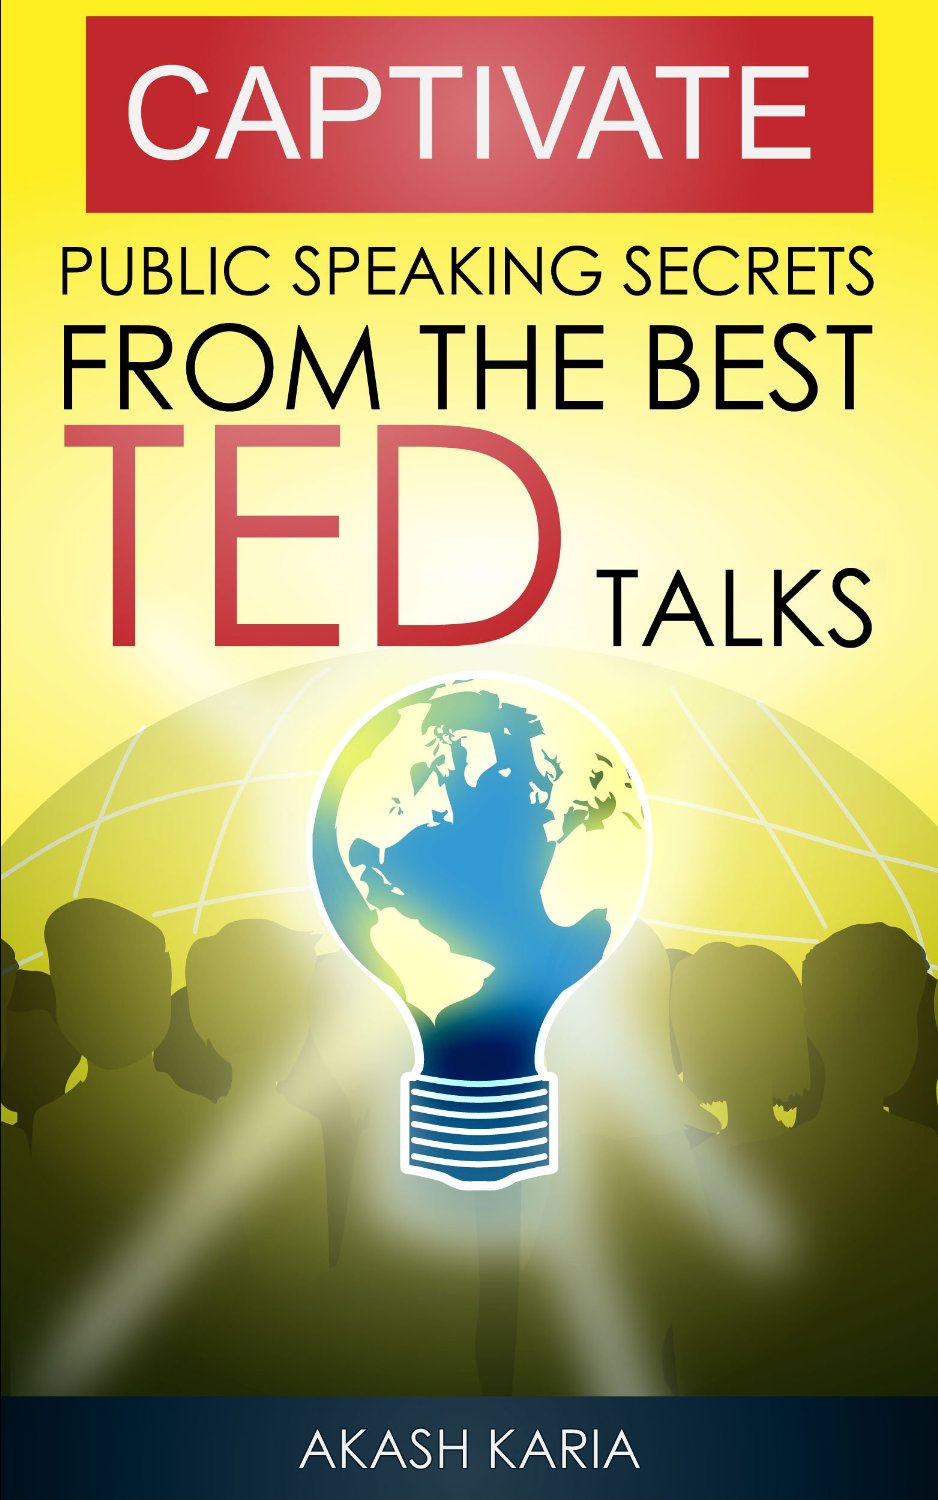 CAPTIVATE – Public Speaking Secrets from TED Talks by Akash Karia